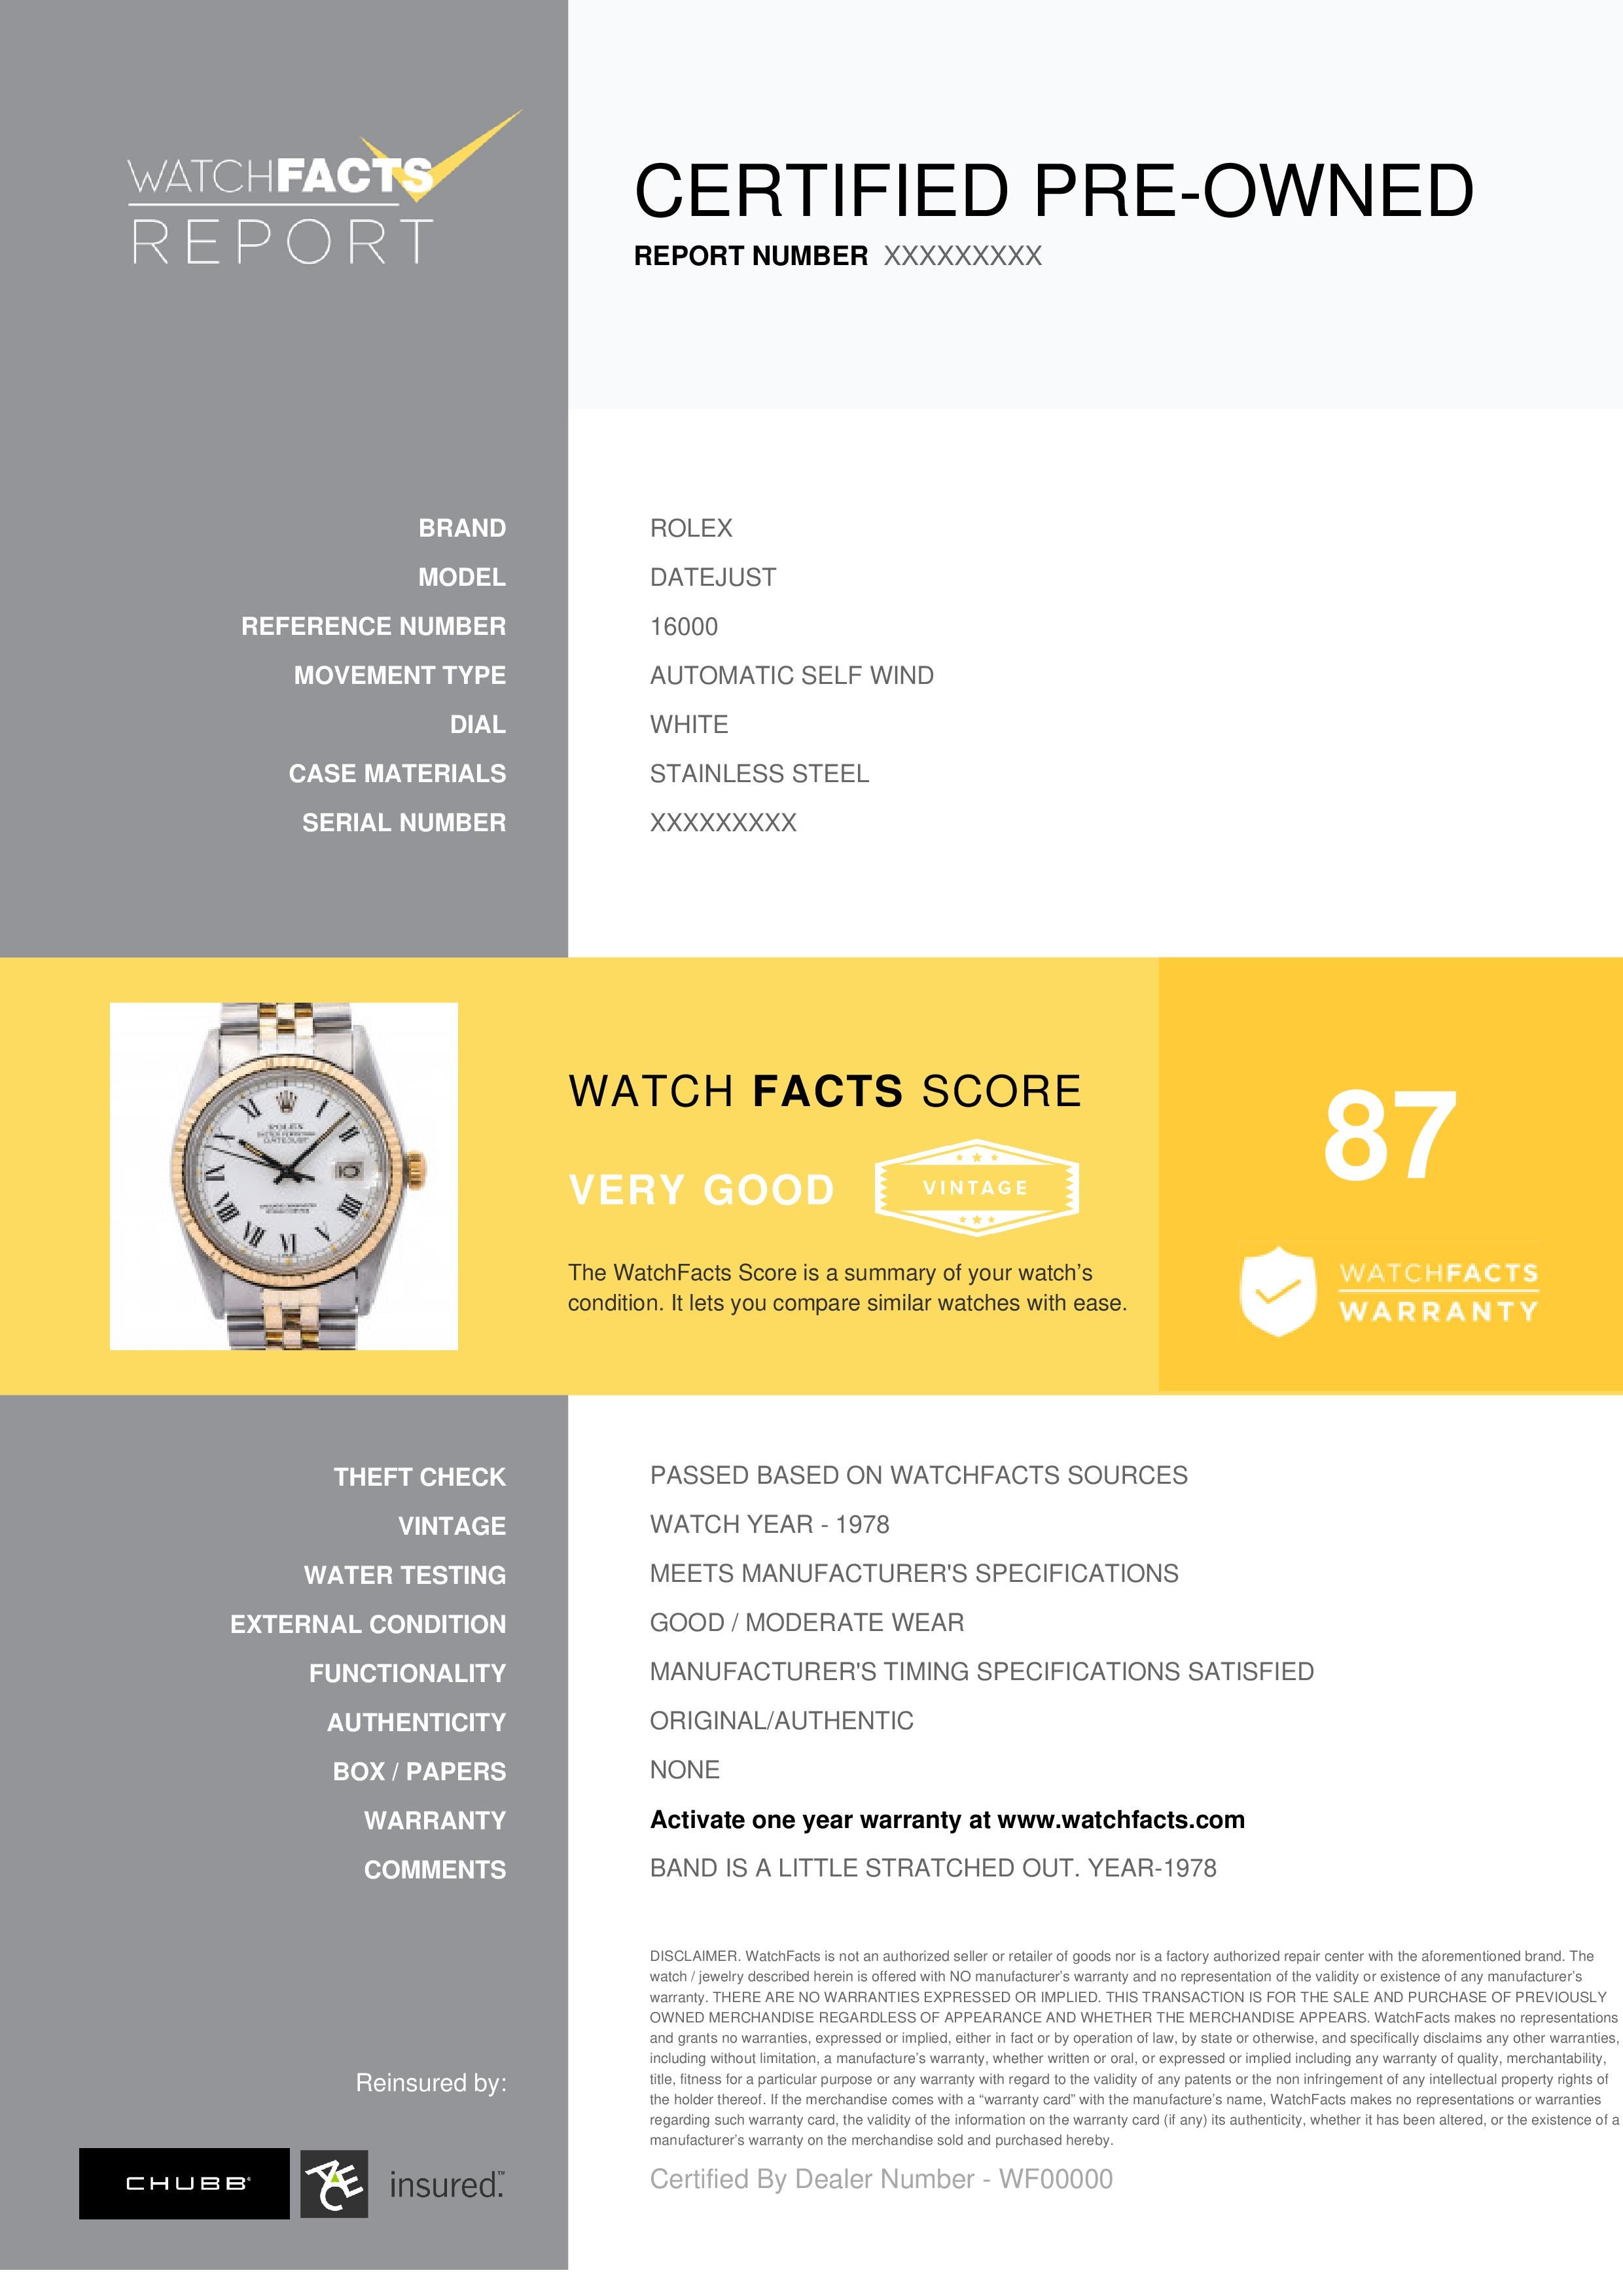 Rolex Datejust Reference #: 16000. Mens Automatic Self Wind Watch Stainless Steel White 36 MM. Verified and Certified by WatchFacts. 1 year warranty offered by WatchFacts.